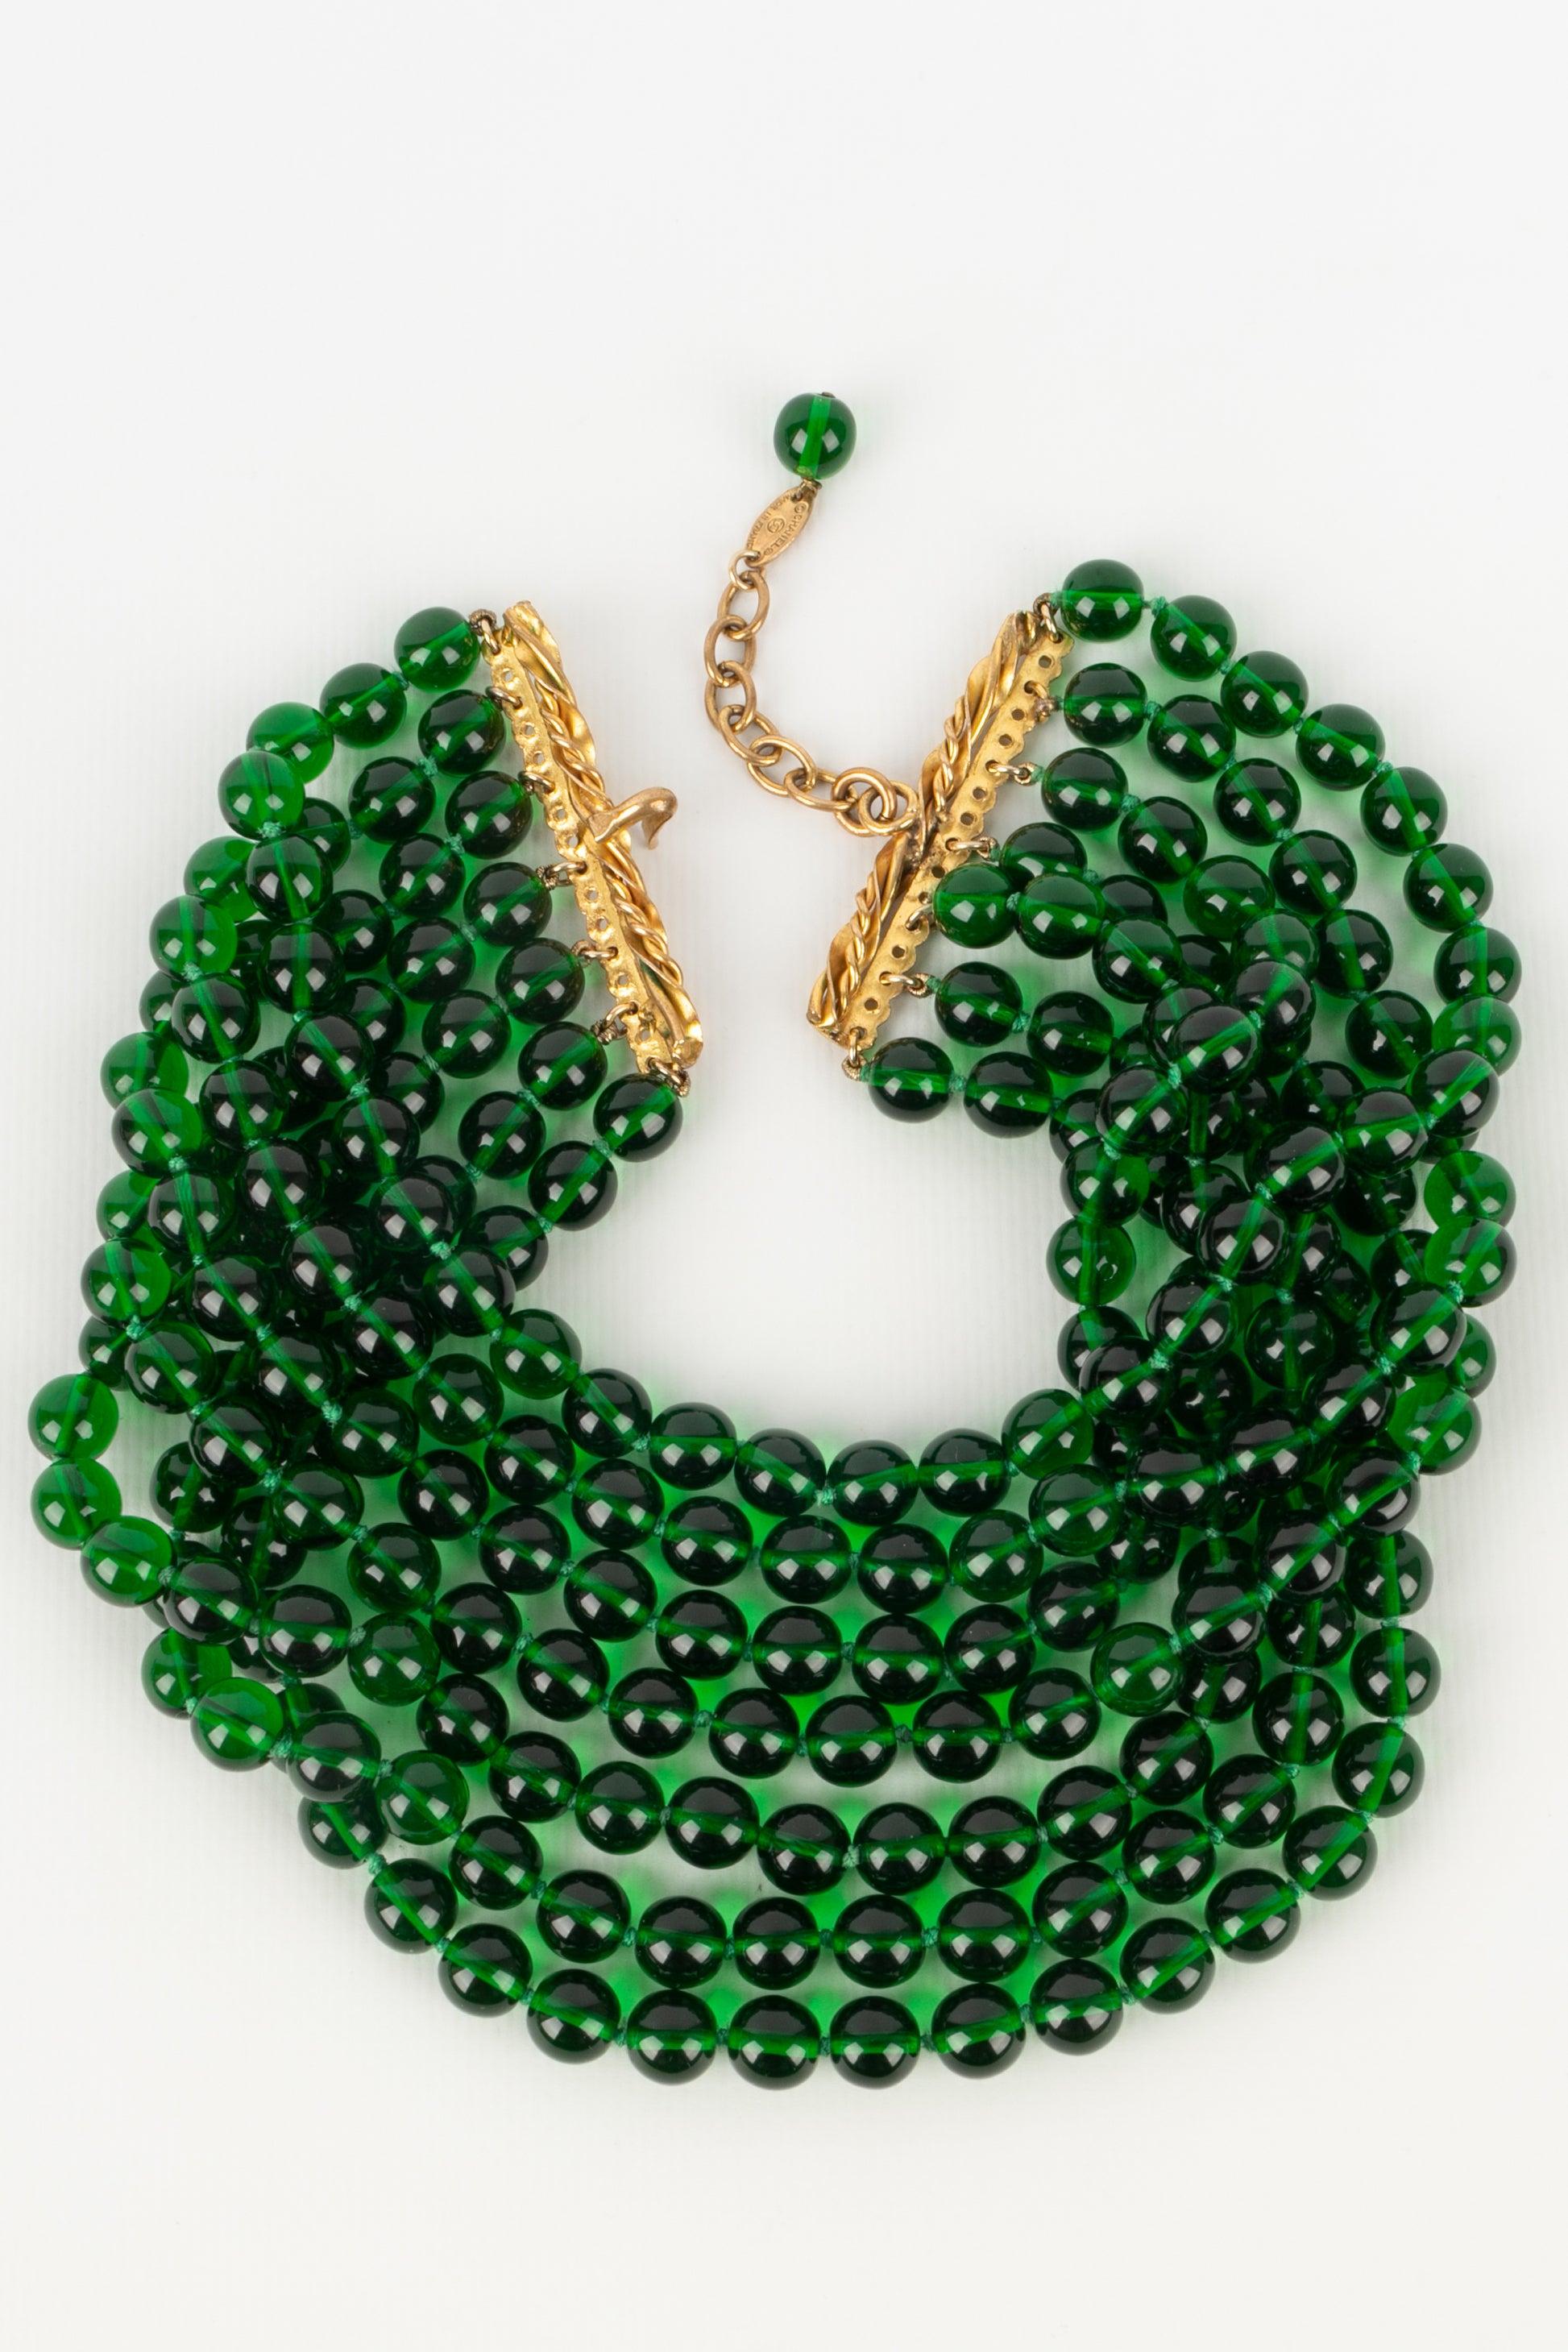 Chanel Short Necklace Made Up of Several Rows of Green Glass Beads, 1980s For Sale 1